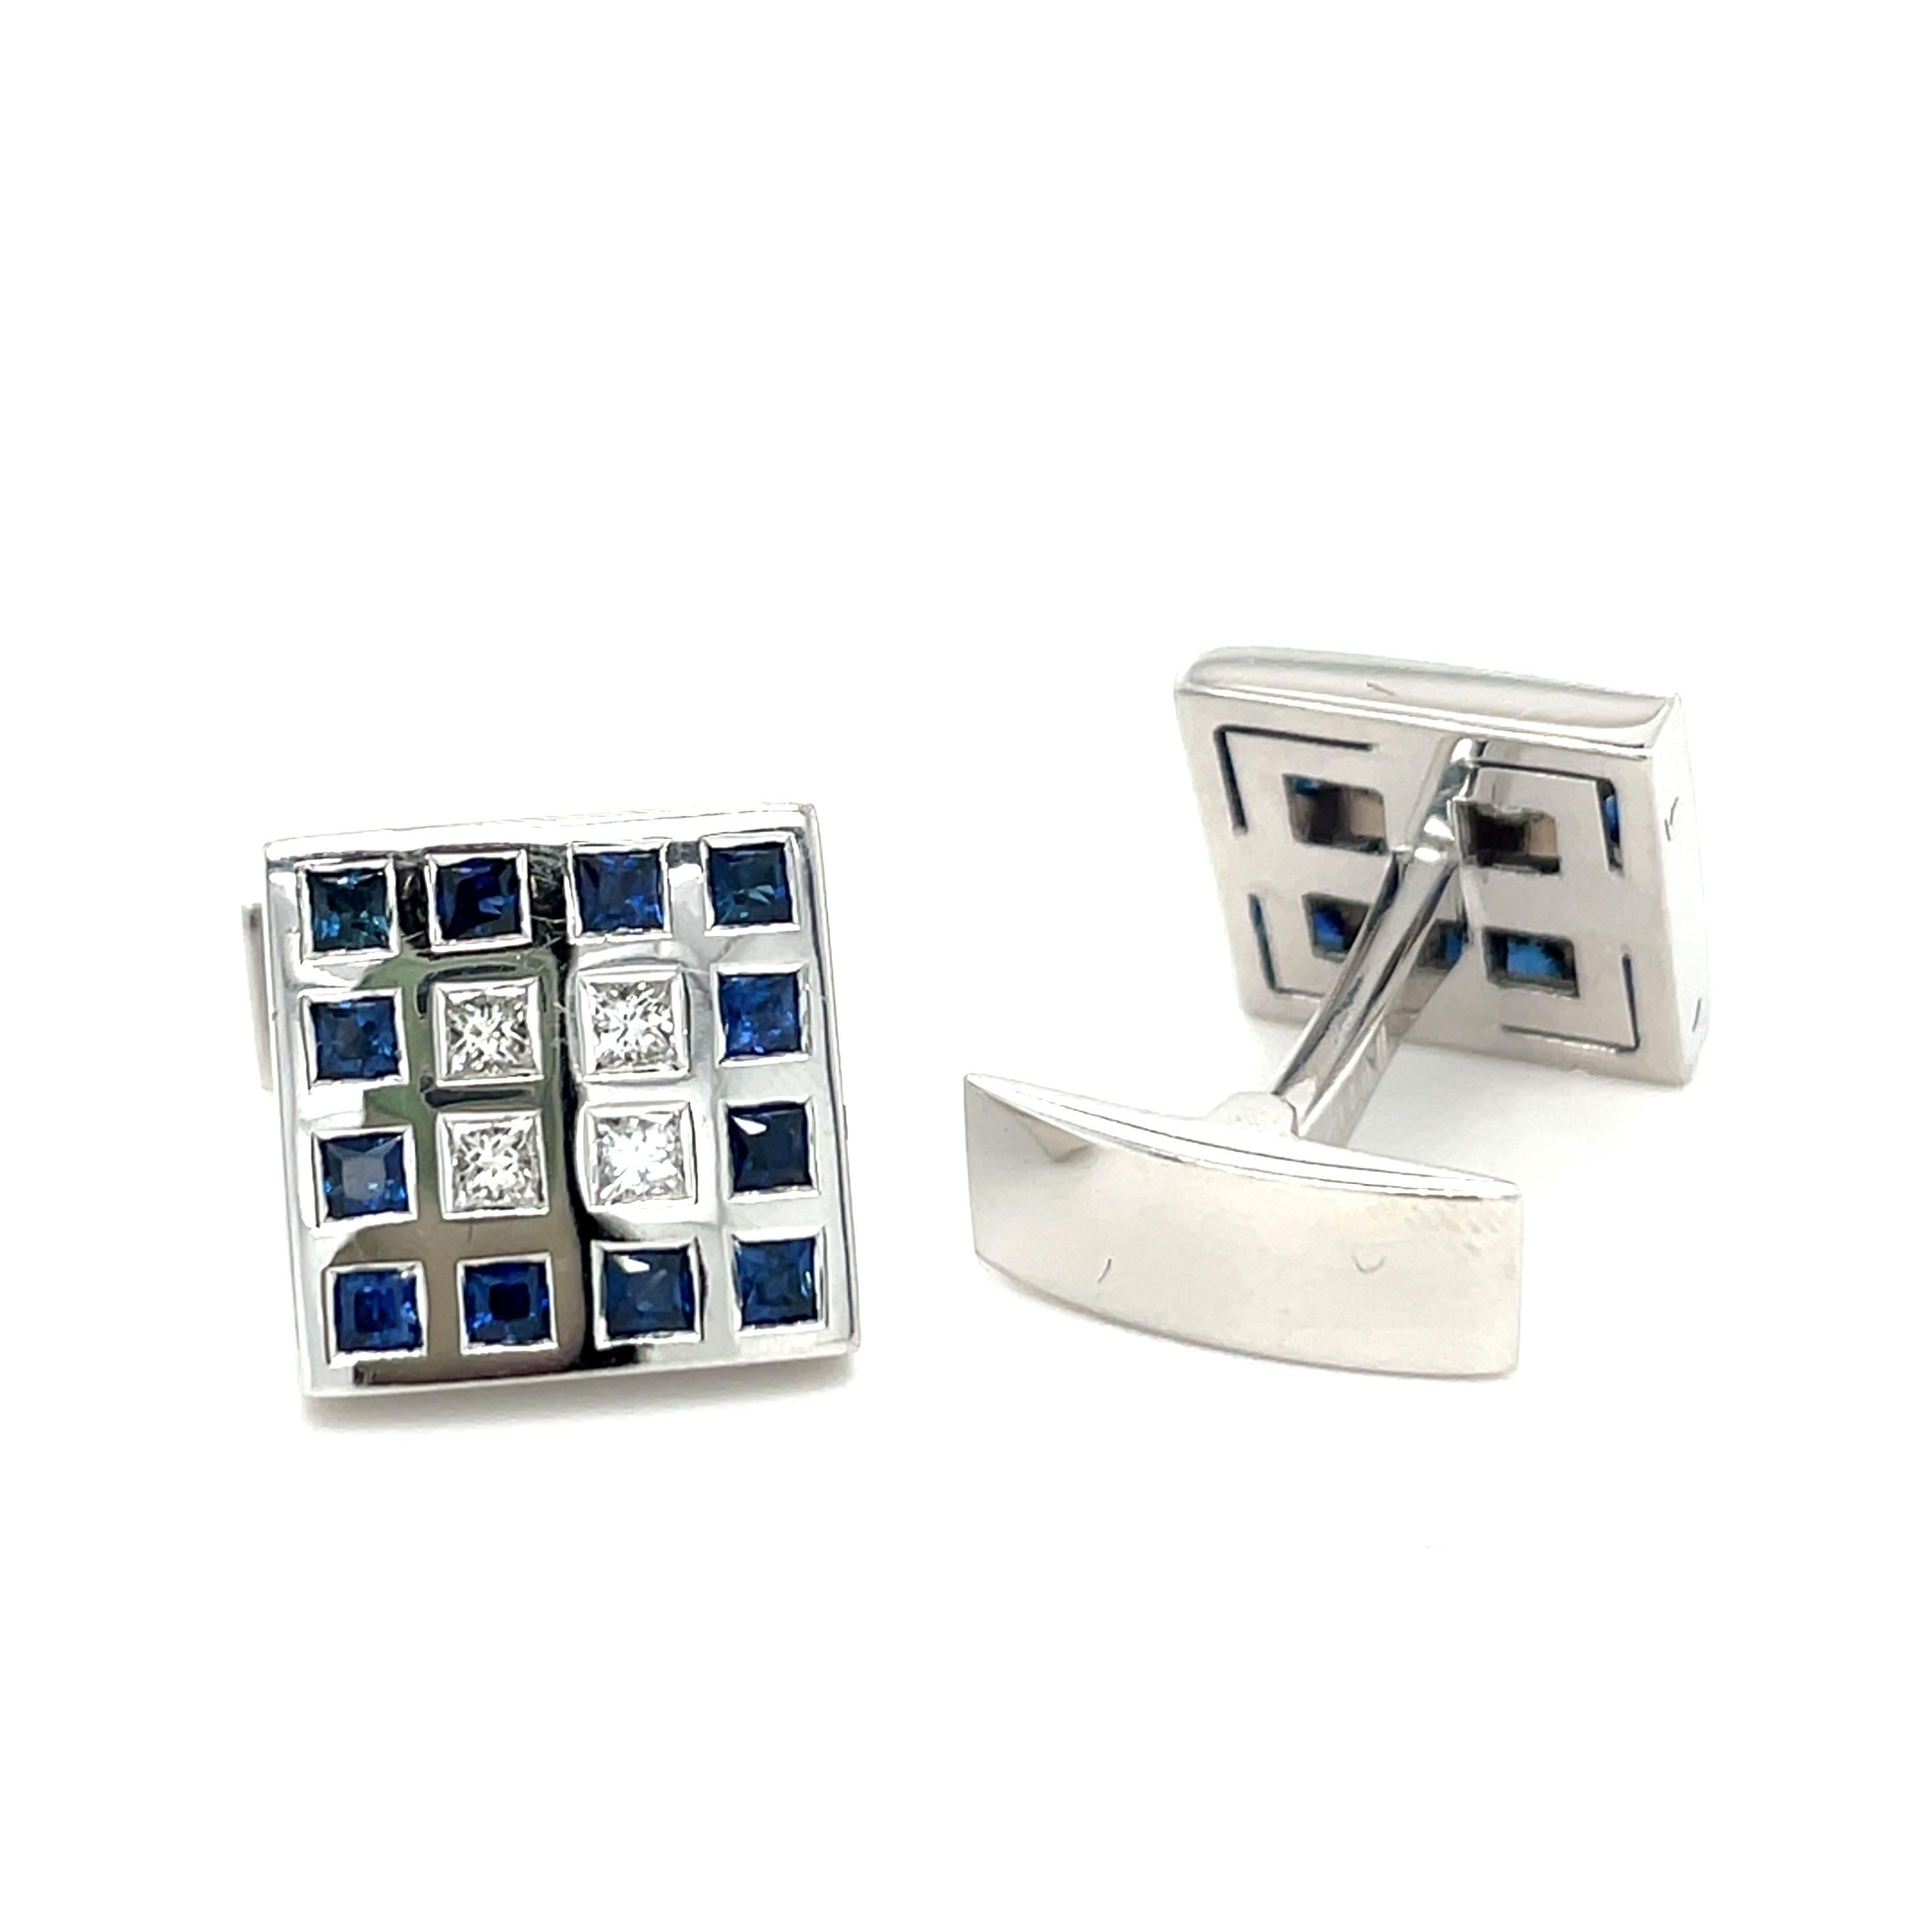 These white gold cufflinks are from Men's Collection. These cufflinks are decorated with 8 Natural Princess Cut Diamond G color VS clarity 0.46 and blue sapphires 1.52 ct. The dimensions of the cufflinks are 1.8cm x 1.8cm. These cufflinks are a